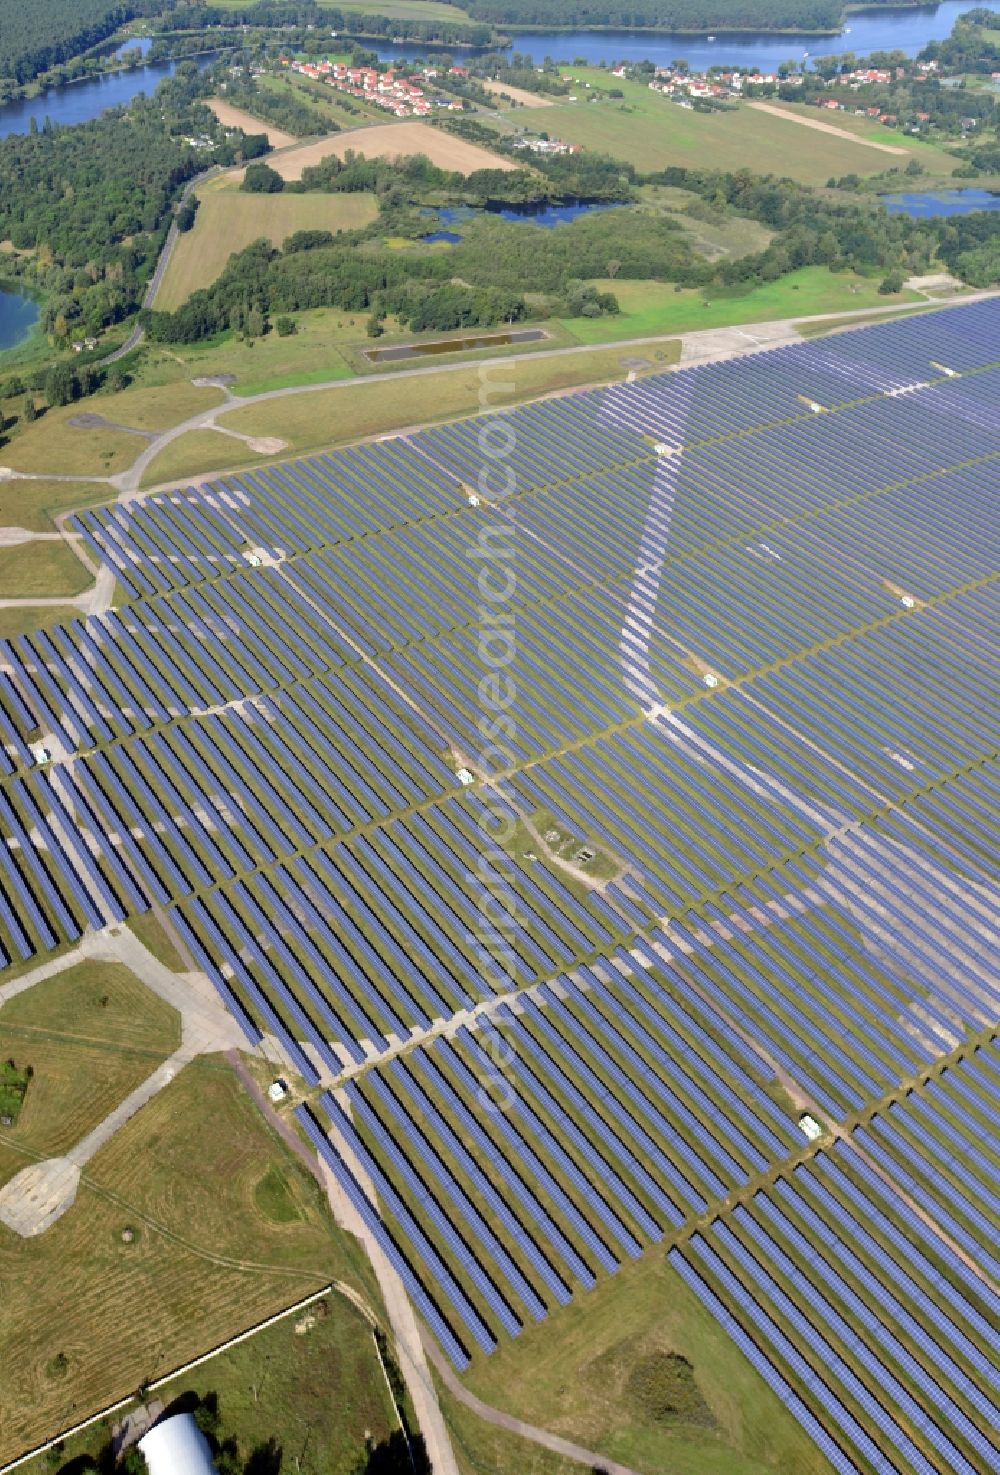 Aerial photograph Brandenburg an der Havel - View on the largest solar Park in Europe on the former NVA airfield Brandenburg-Briest in Brandenburg an der Havel in the Federal State of Brandenburg. It is a joint project between the company of Q-cells and the investors Luxcara GmbH and the MCG group